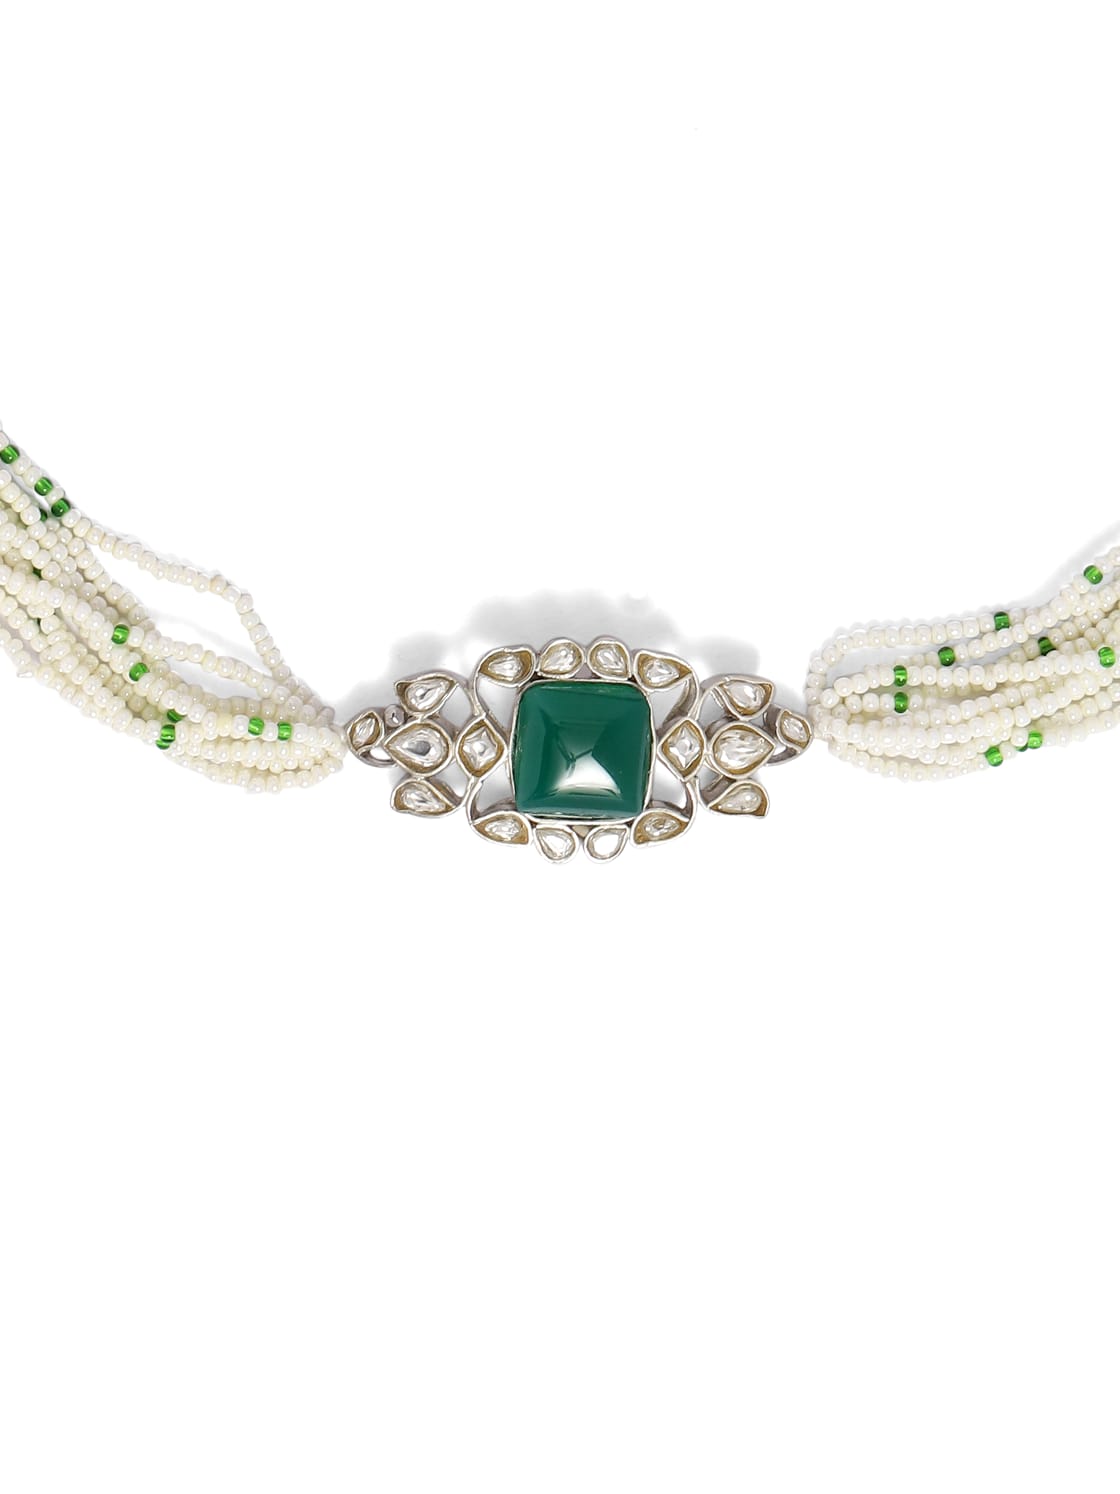 Handcrafted sterling Silver choker with billor Polki, green onyx and cultured pearls in Sarafa closure.